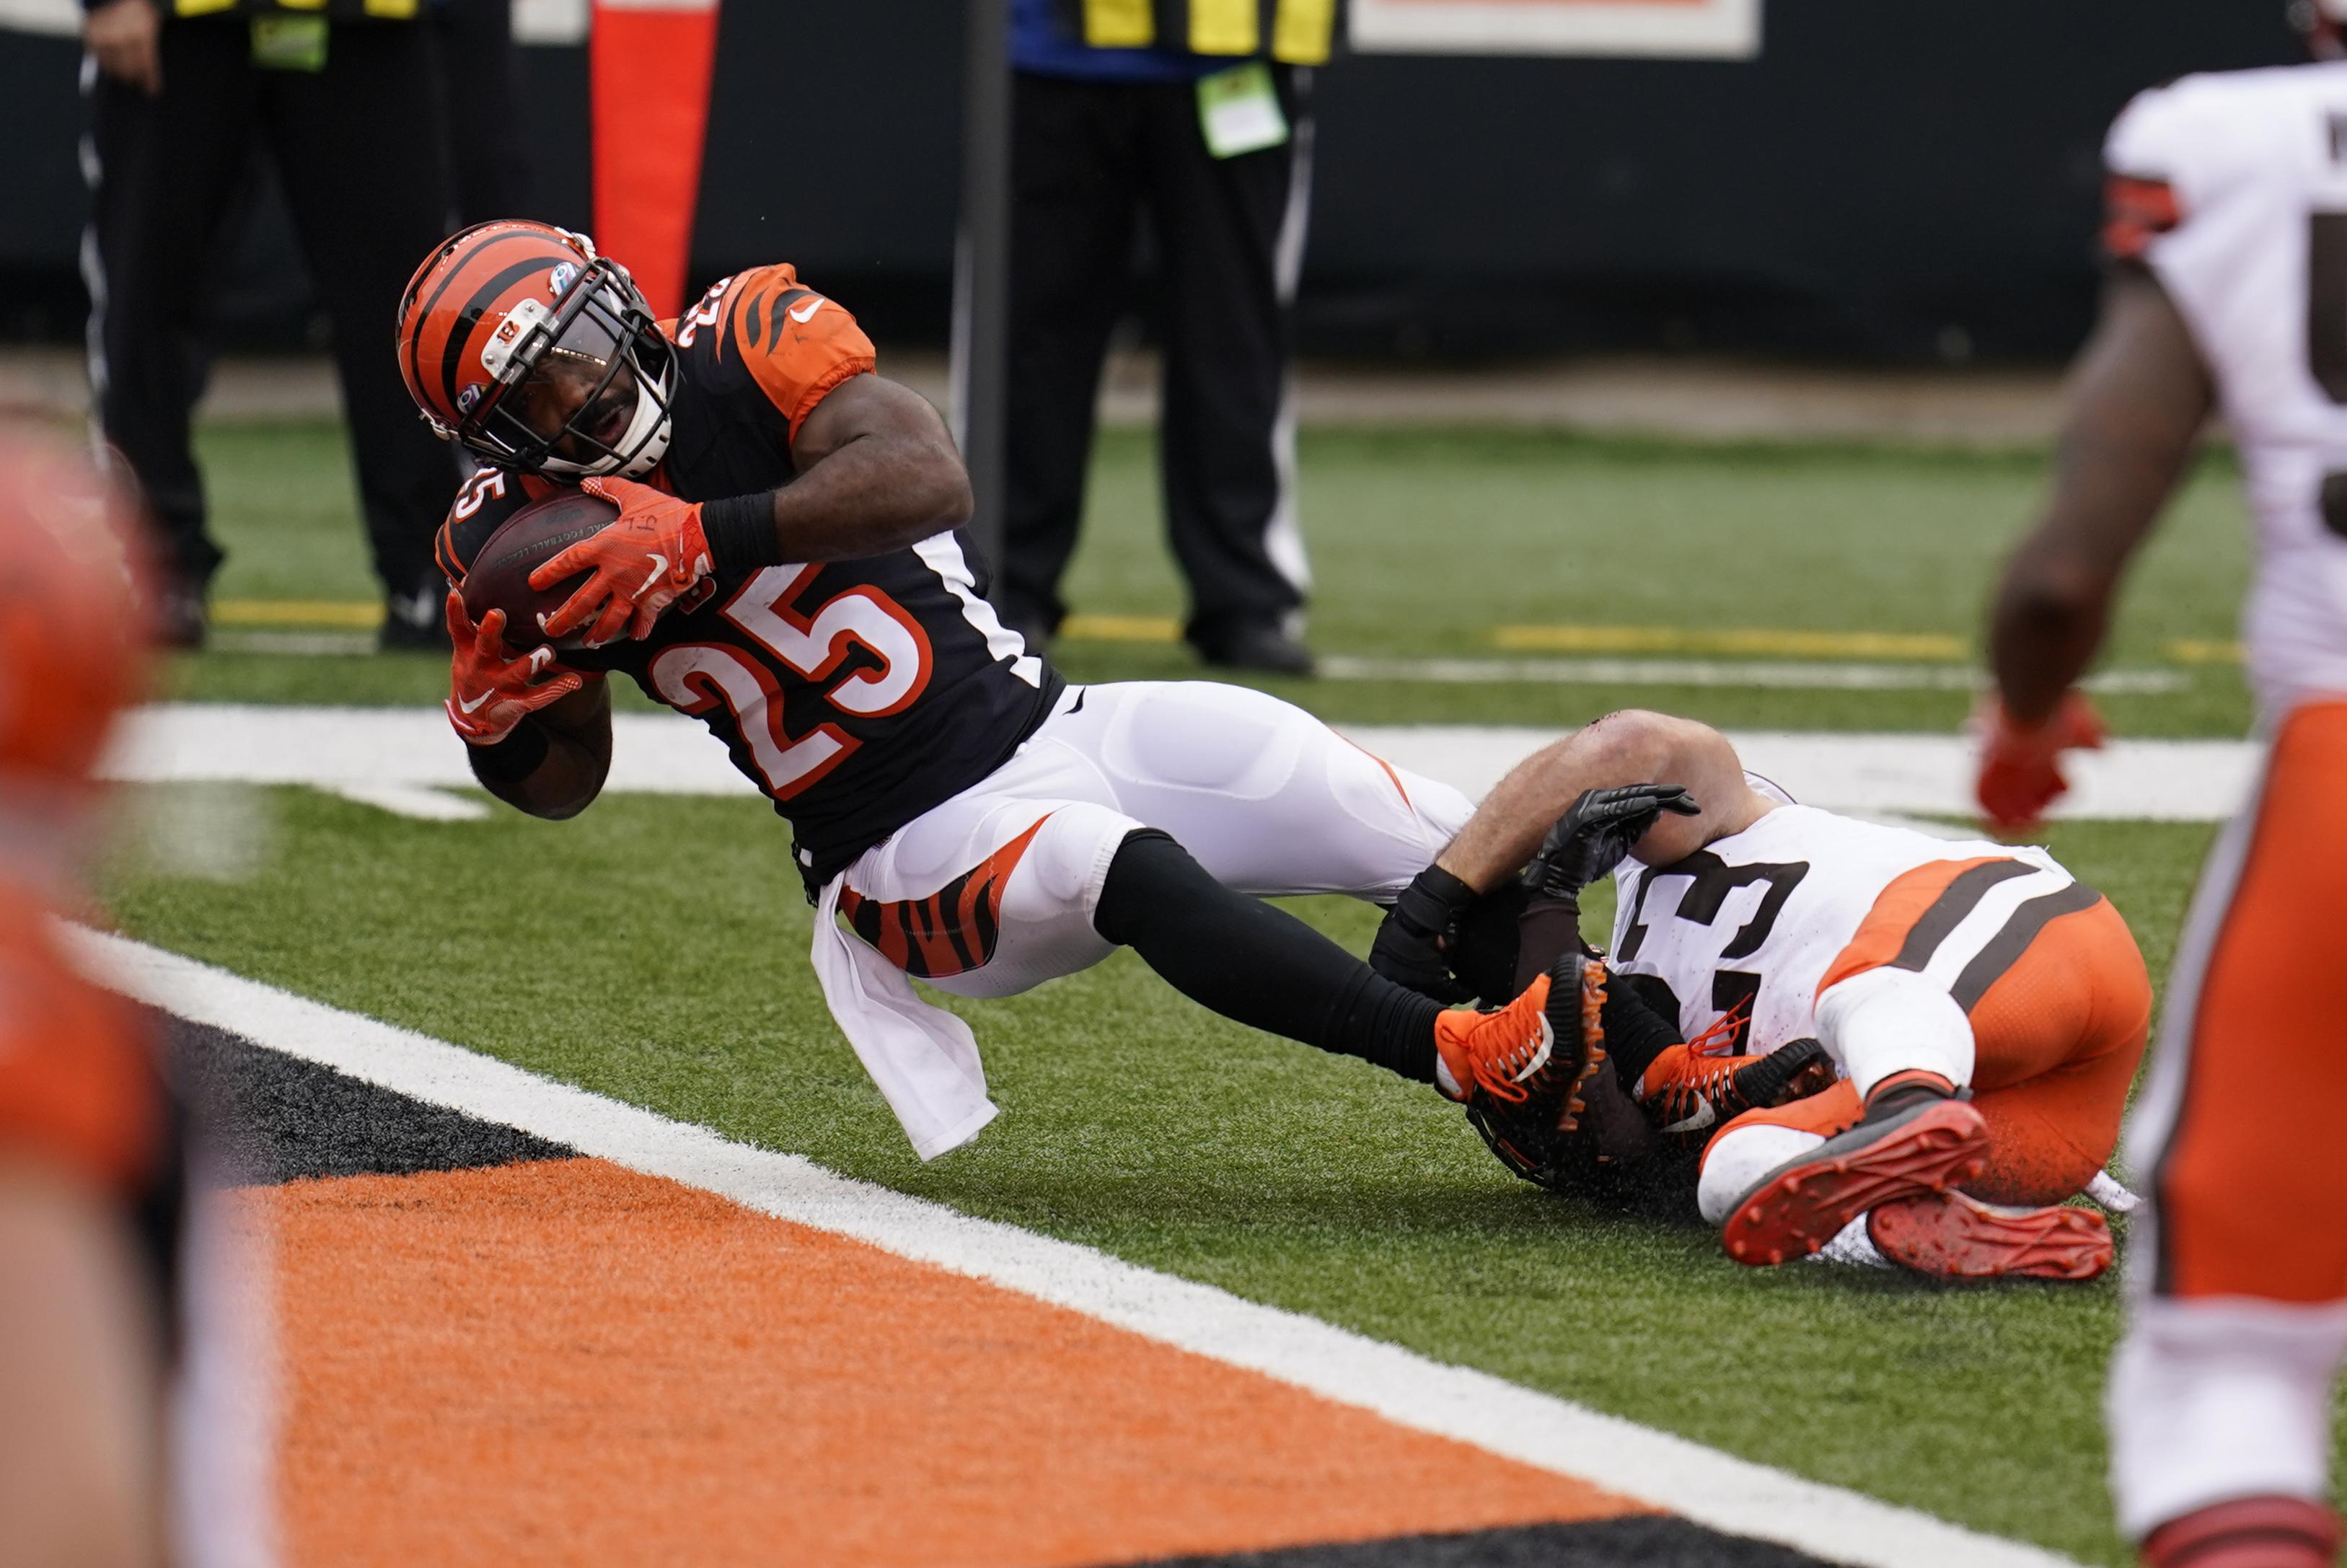 Bengals get more bad news when concussion sidelines Bernard